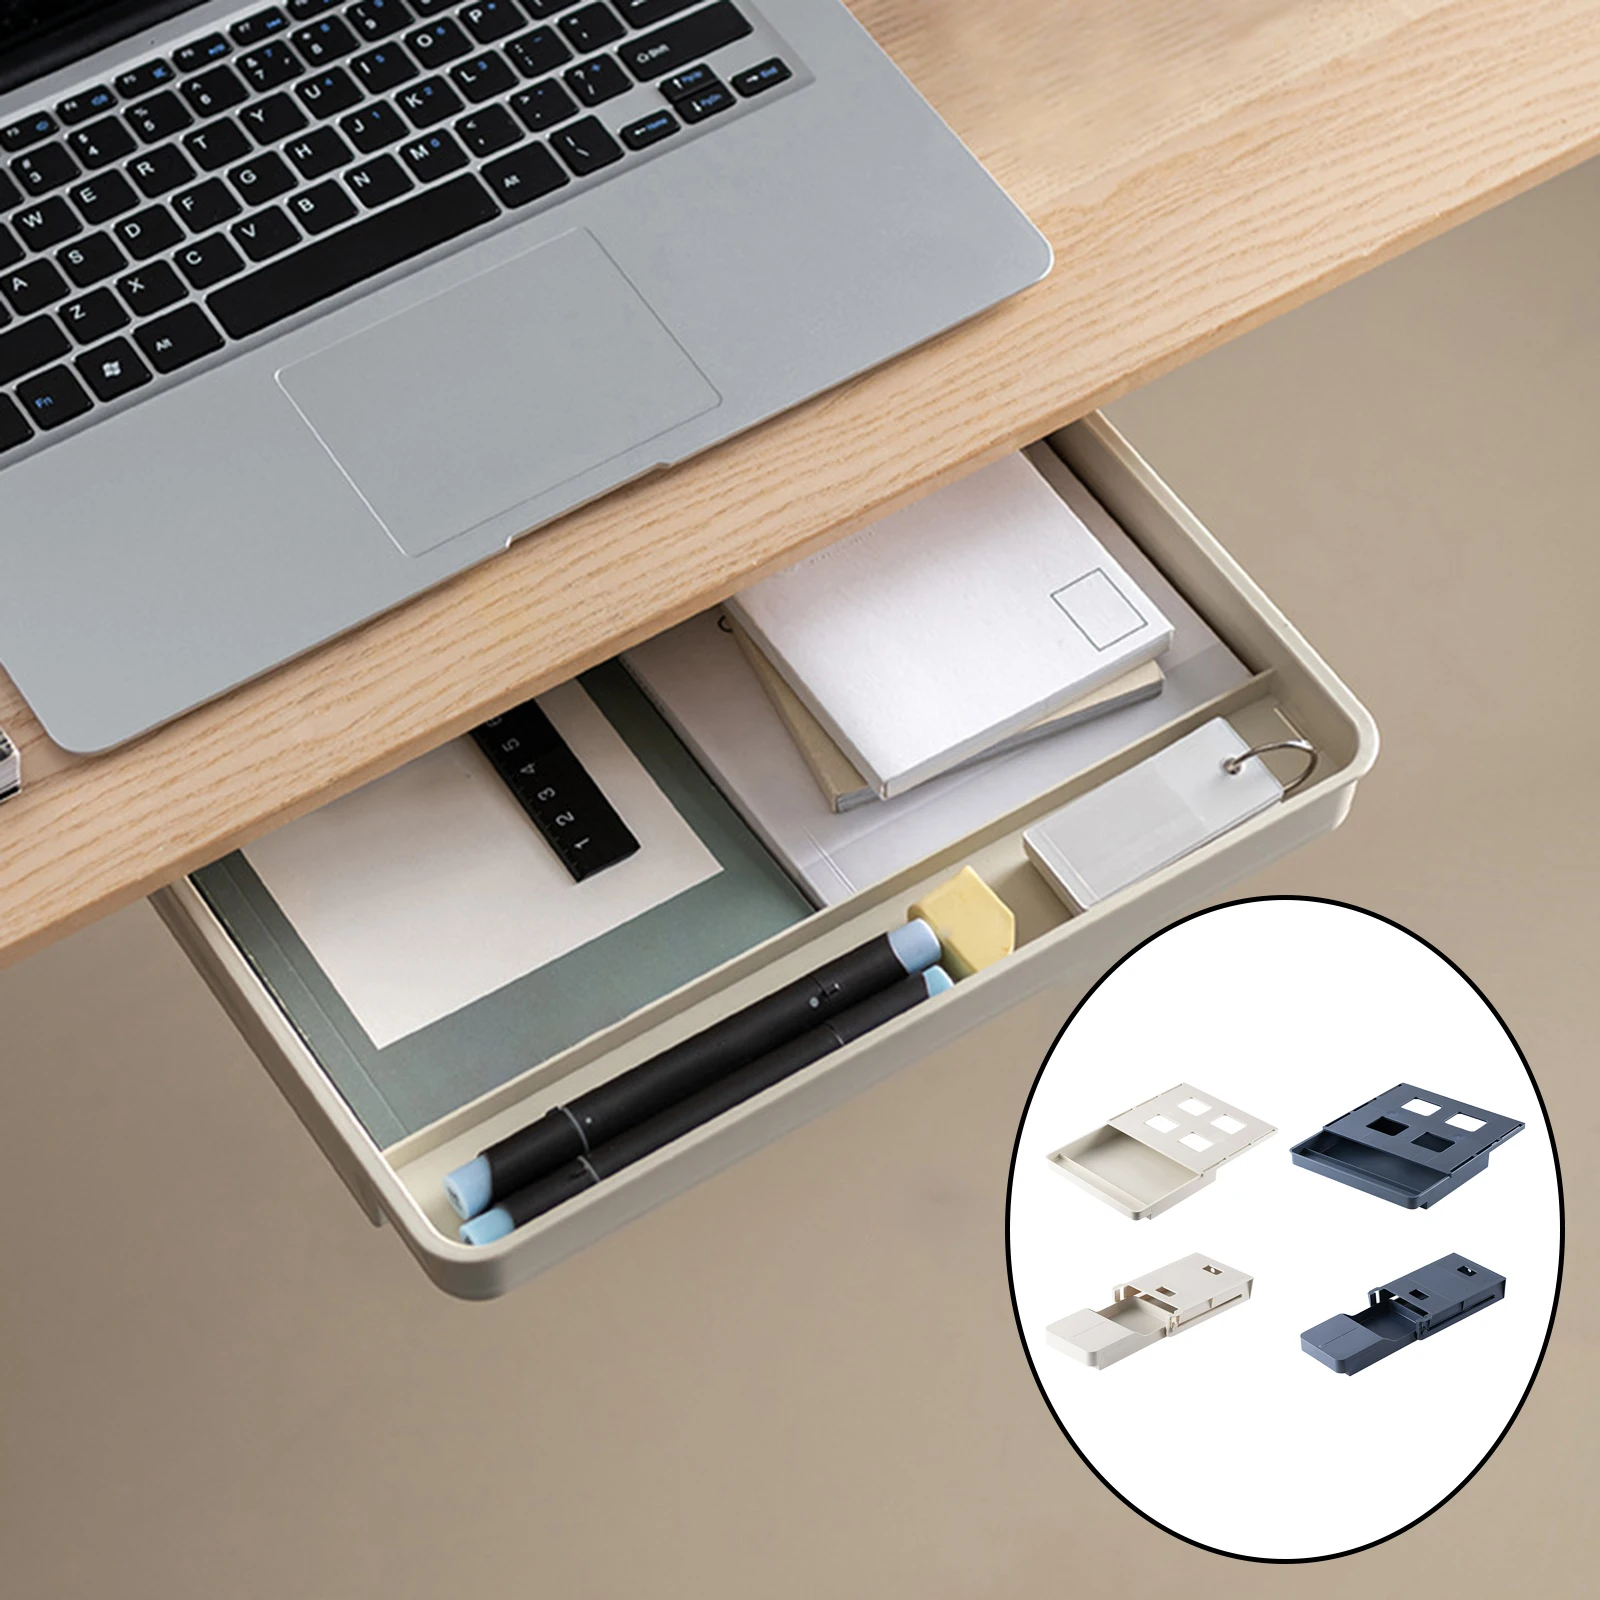 Under Desk Drawer Adhesive Large Capacity for School Workspace Pen Holder Storage Tray Organizer Slide Out